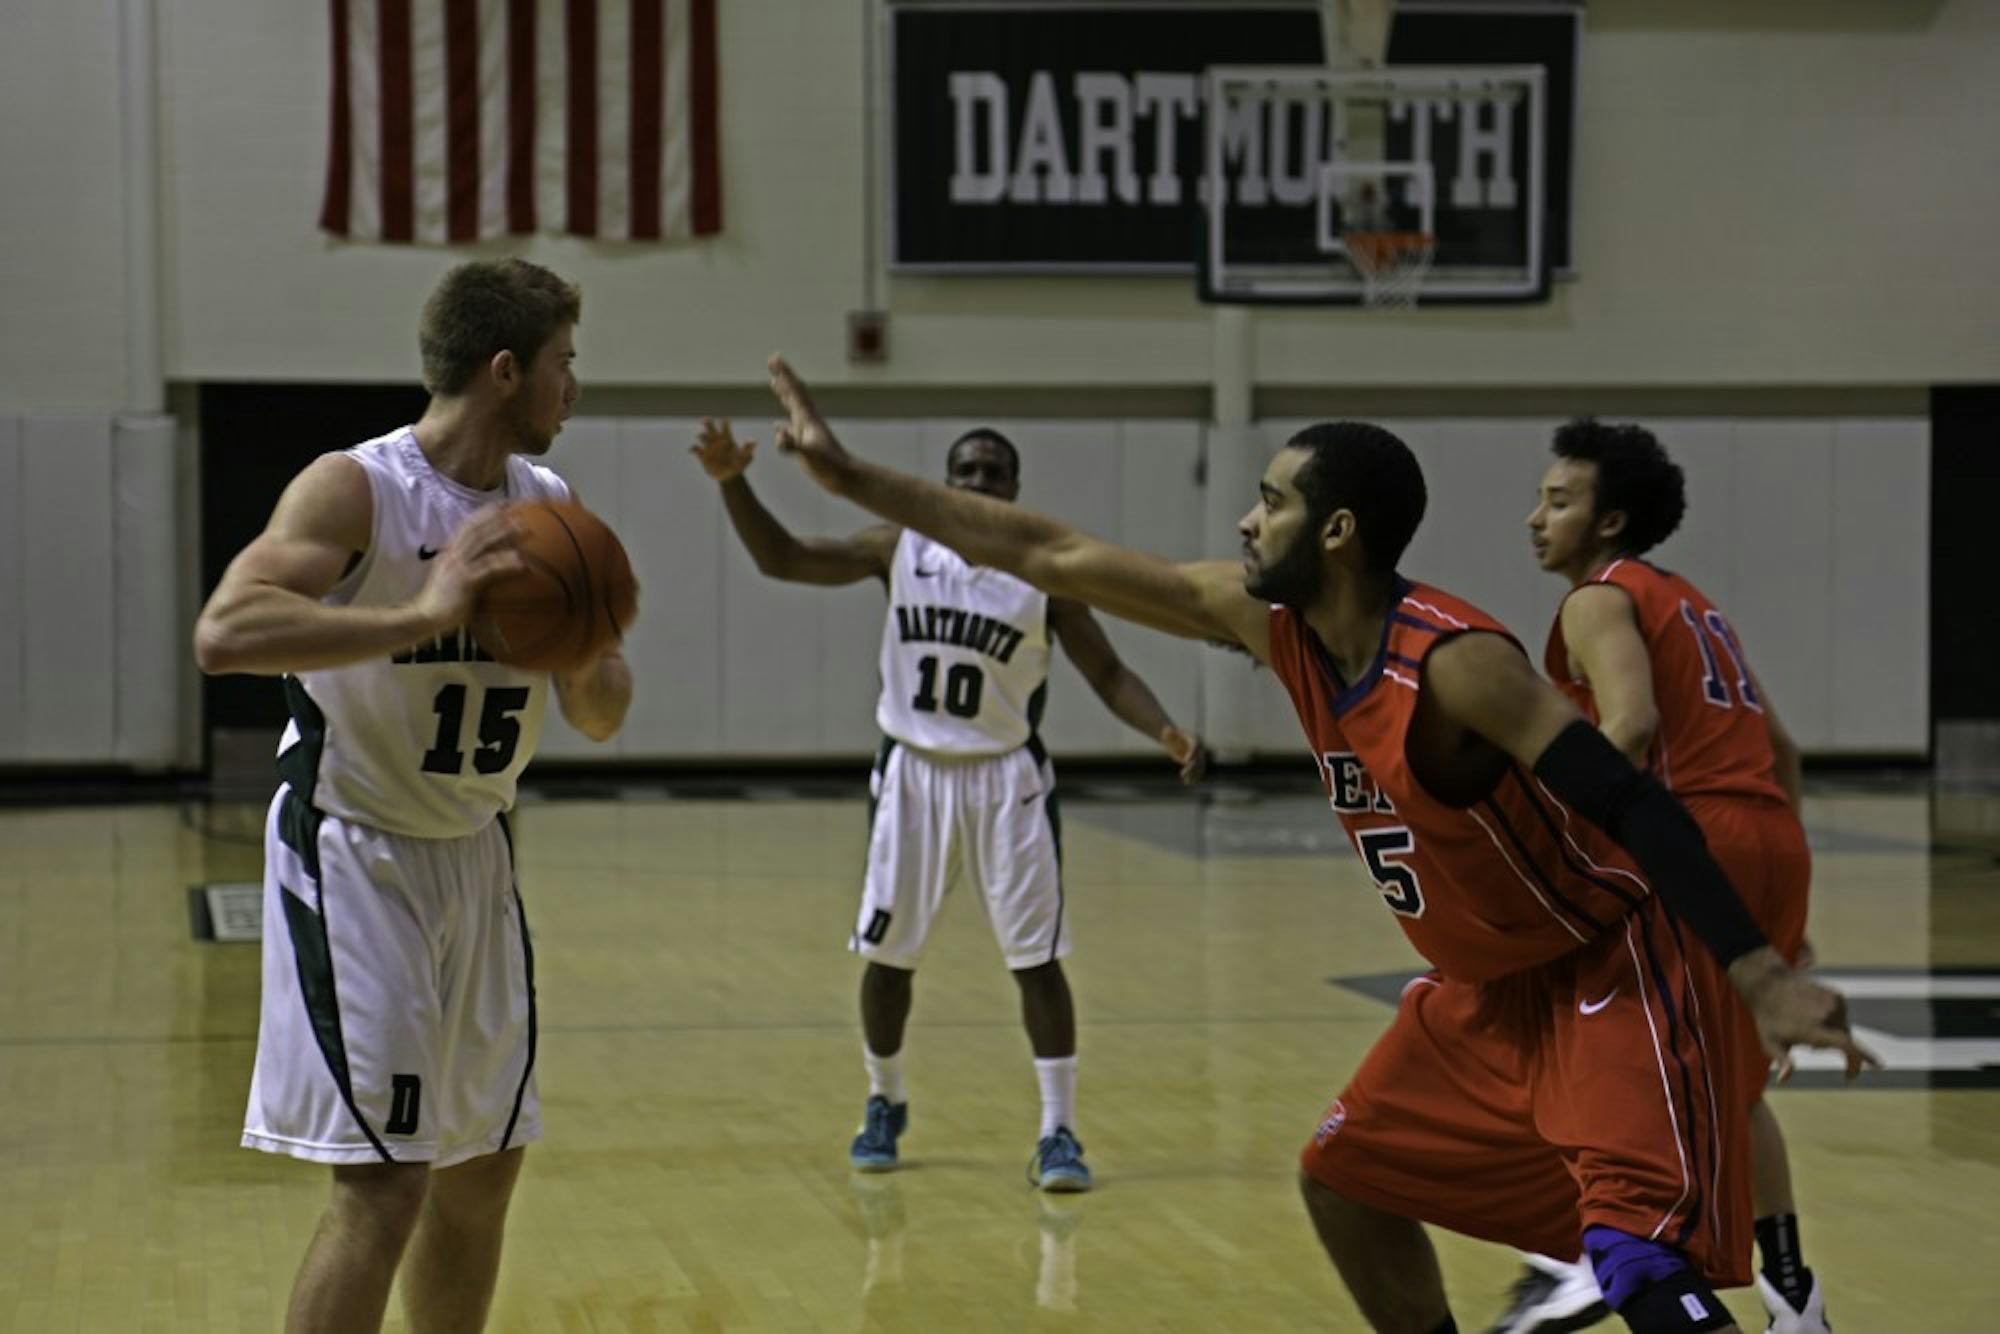 The men's basketball team won five of its last seven games, including a game-winning overtime buzzer-beater